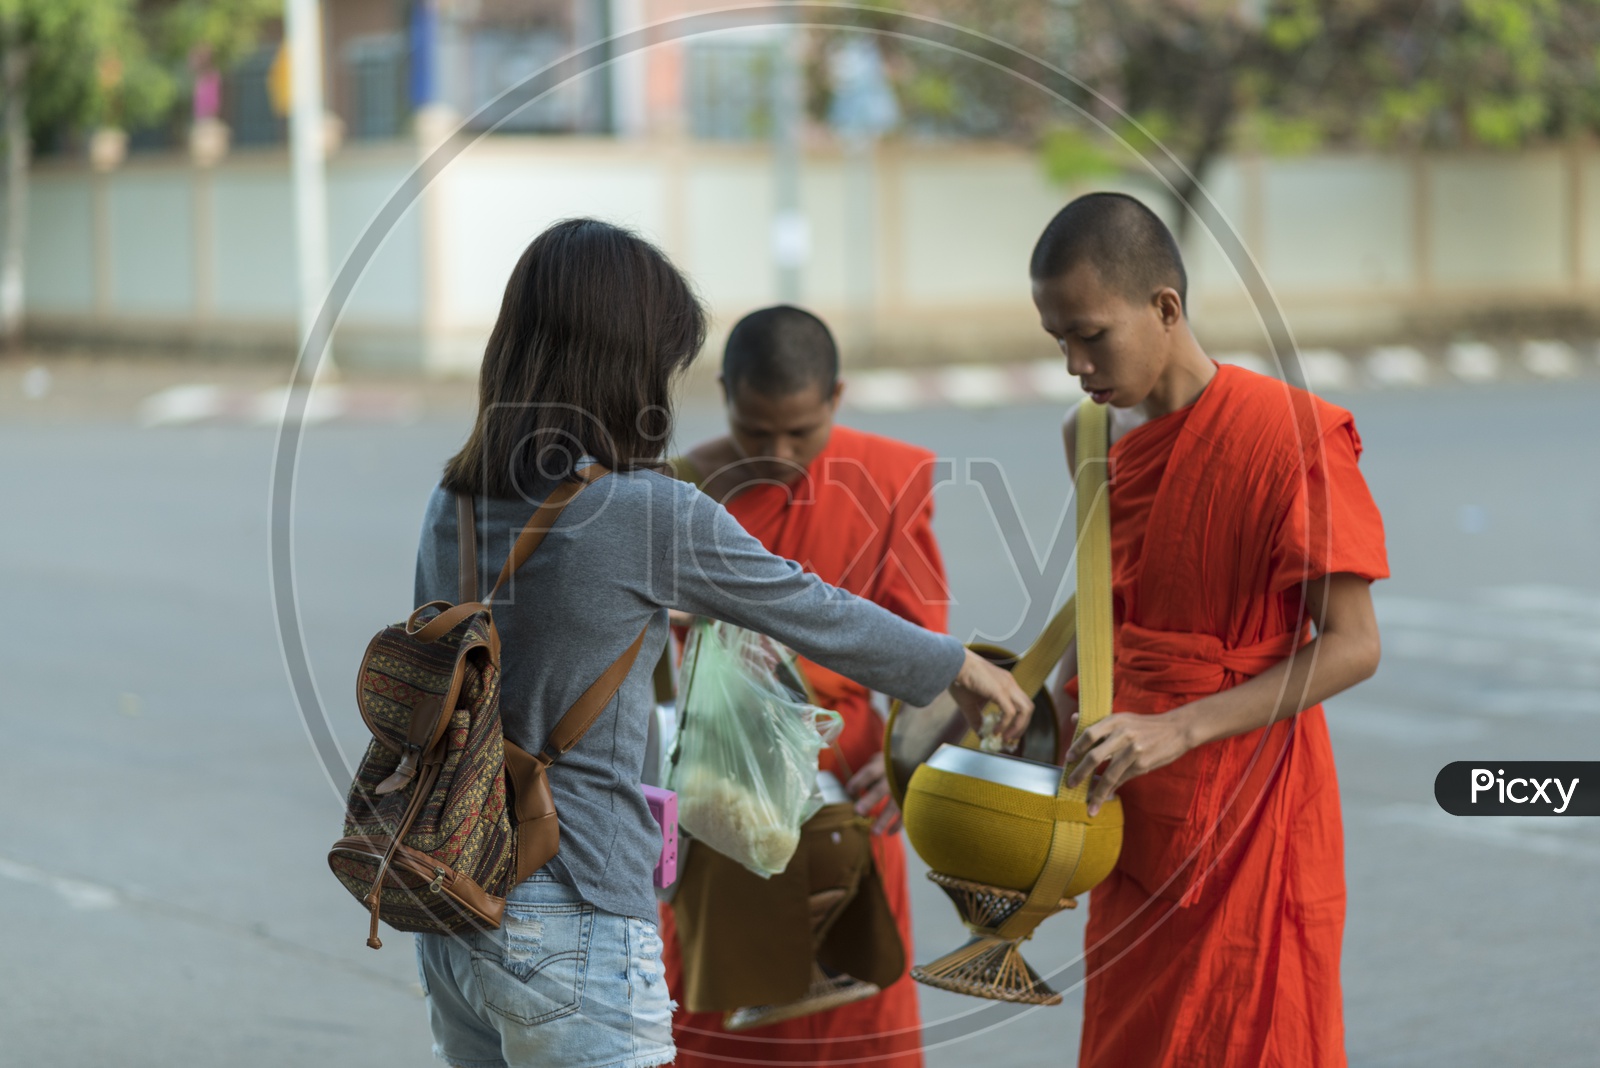 Traditional Alms giving ceremony of distributing food to Buddhist monks on the streets of Luang Prabang, Laos